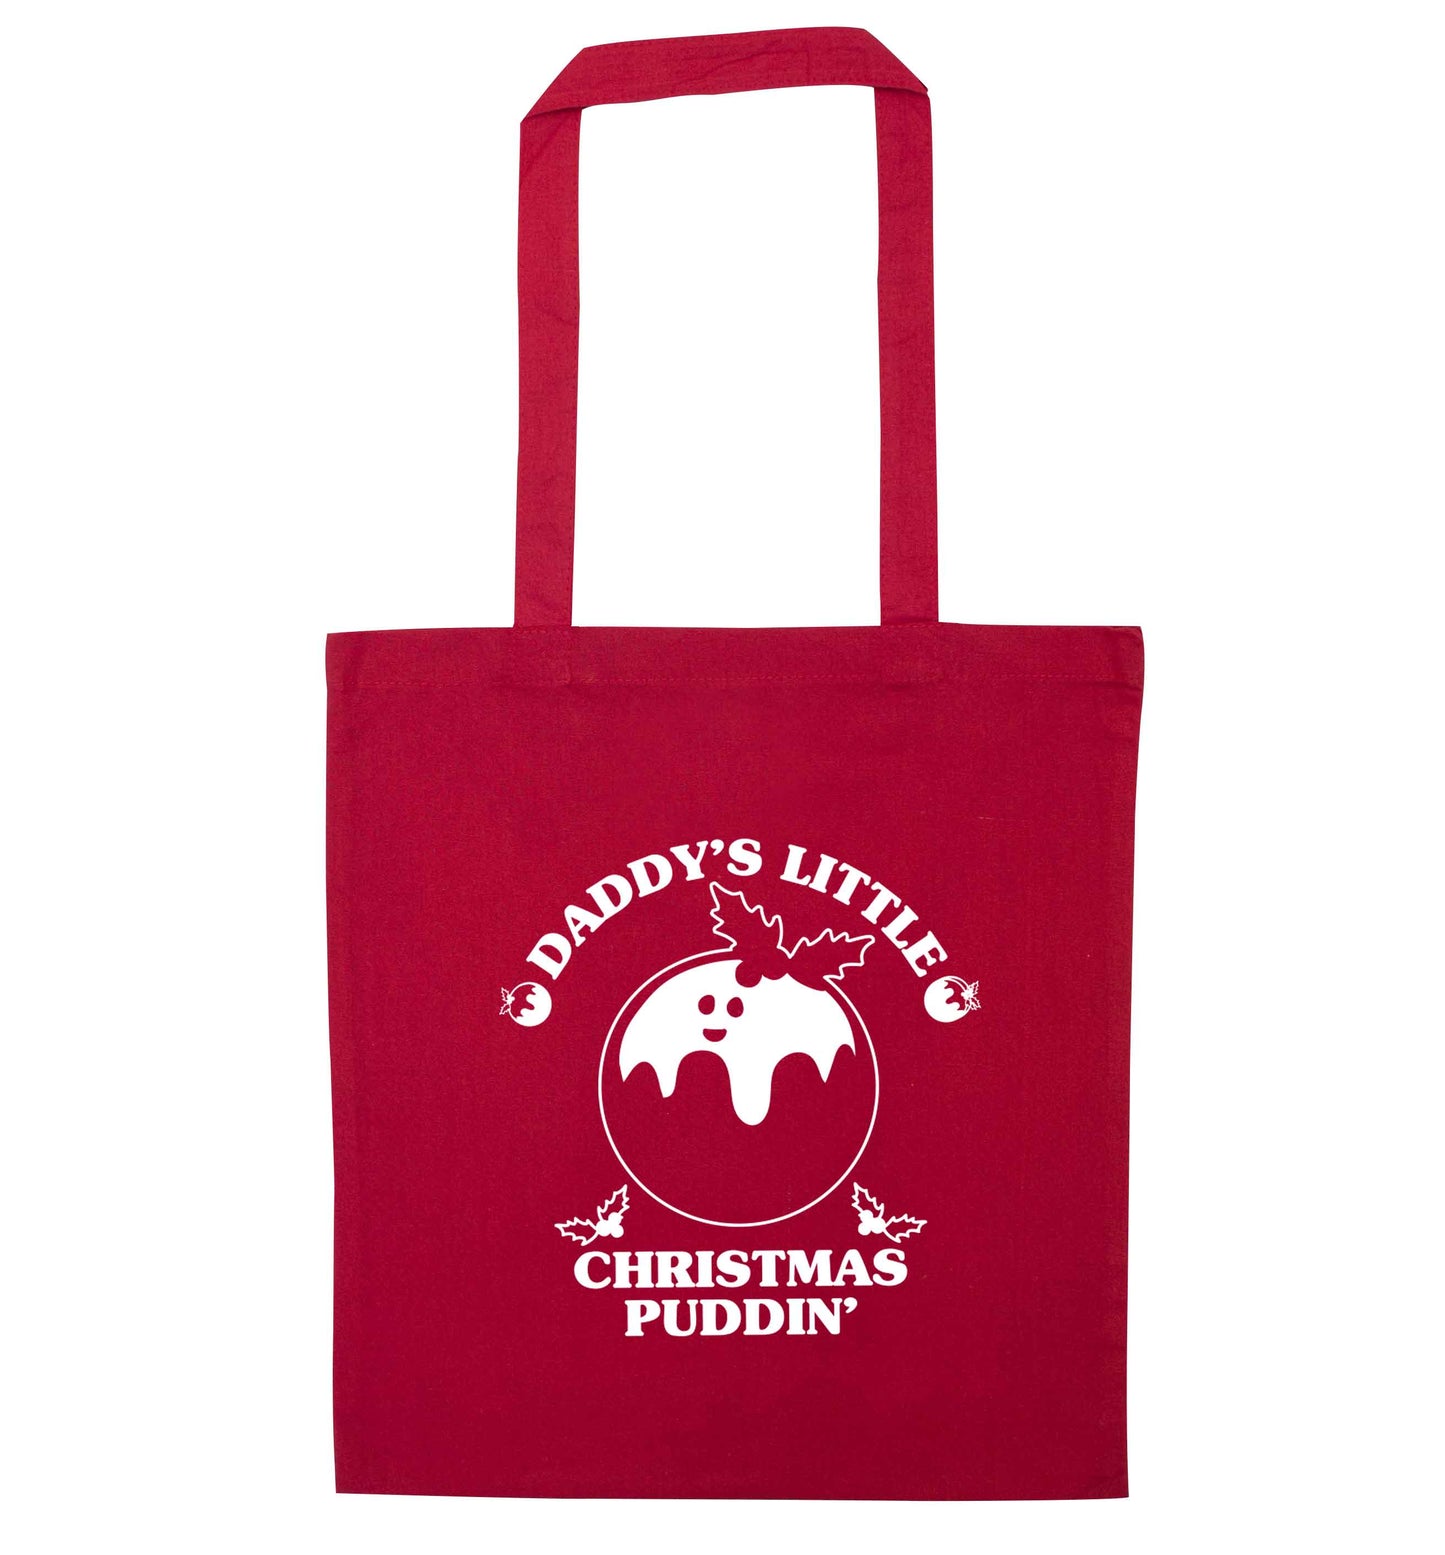 Daddy's little Christmas puddin' red tote bag